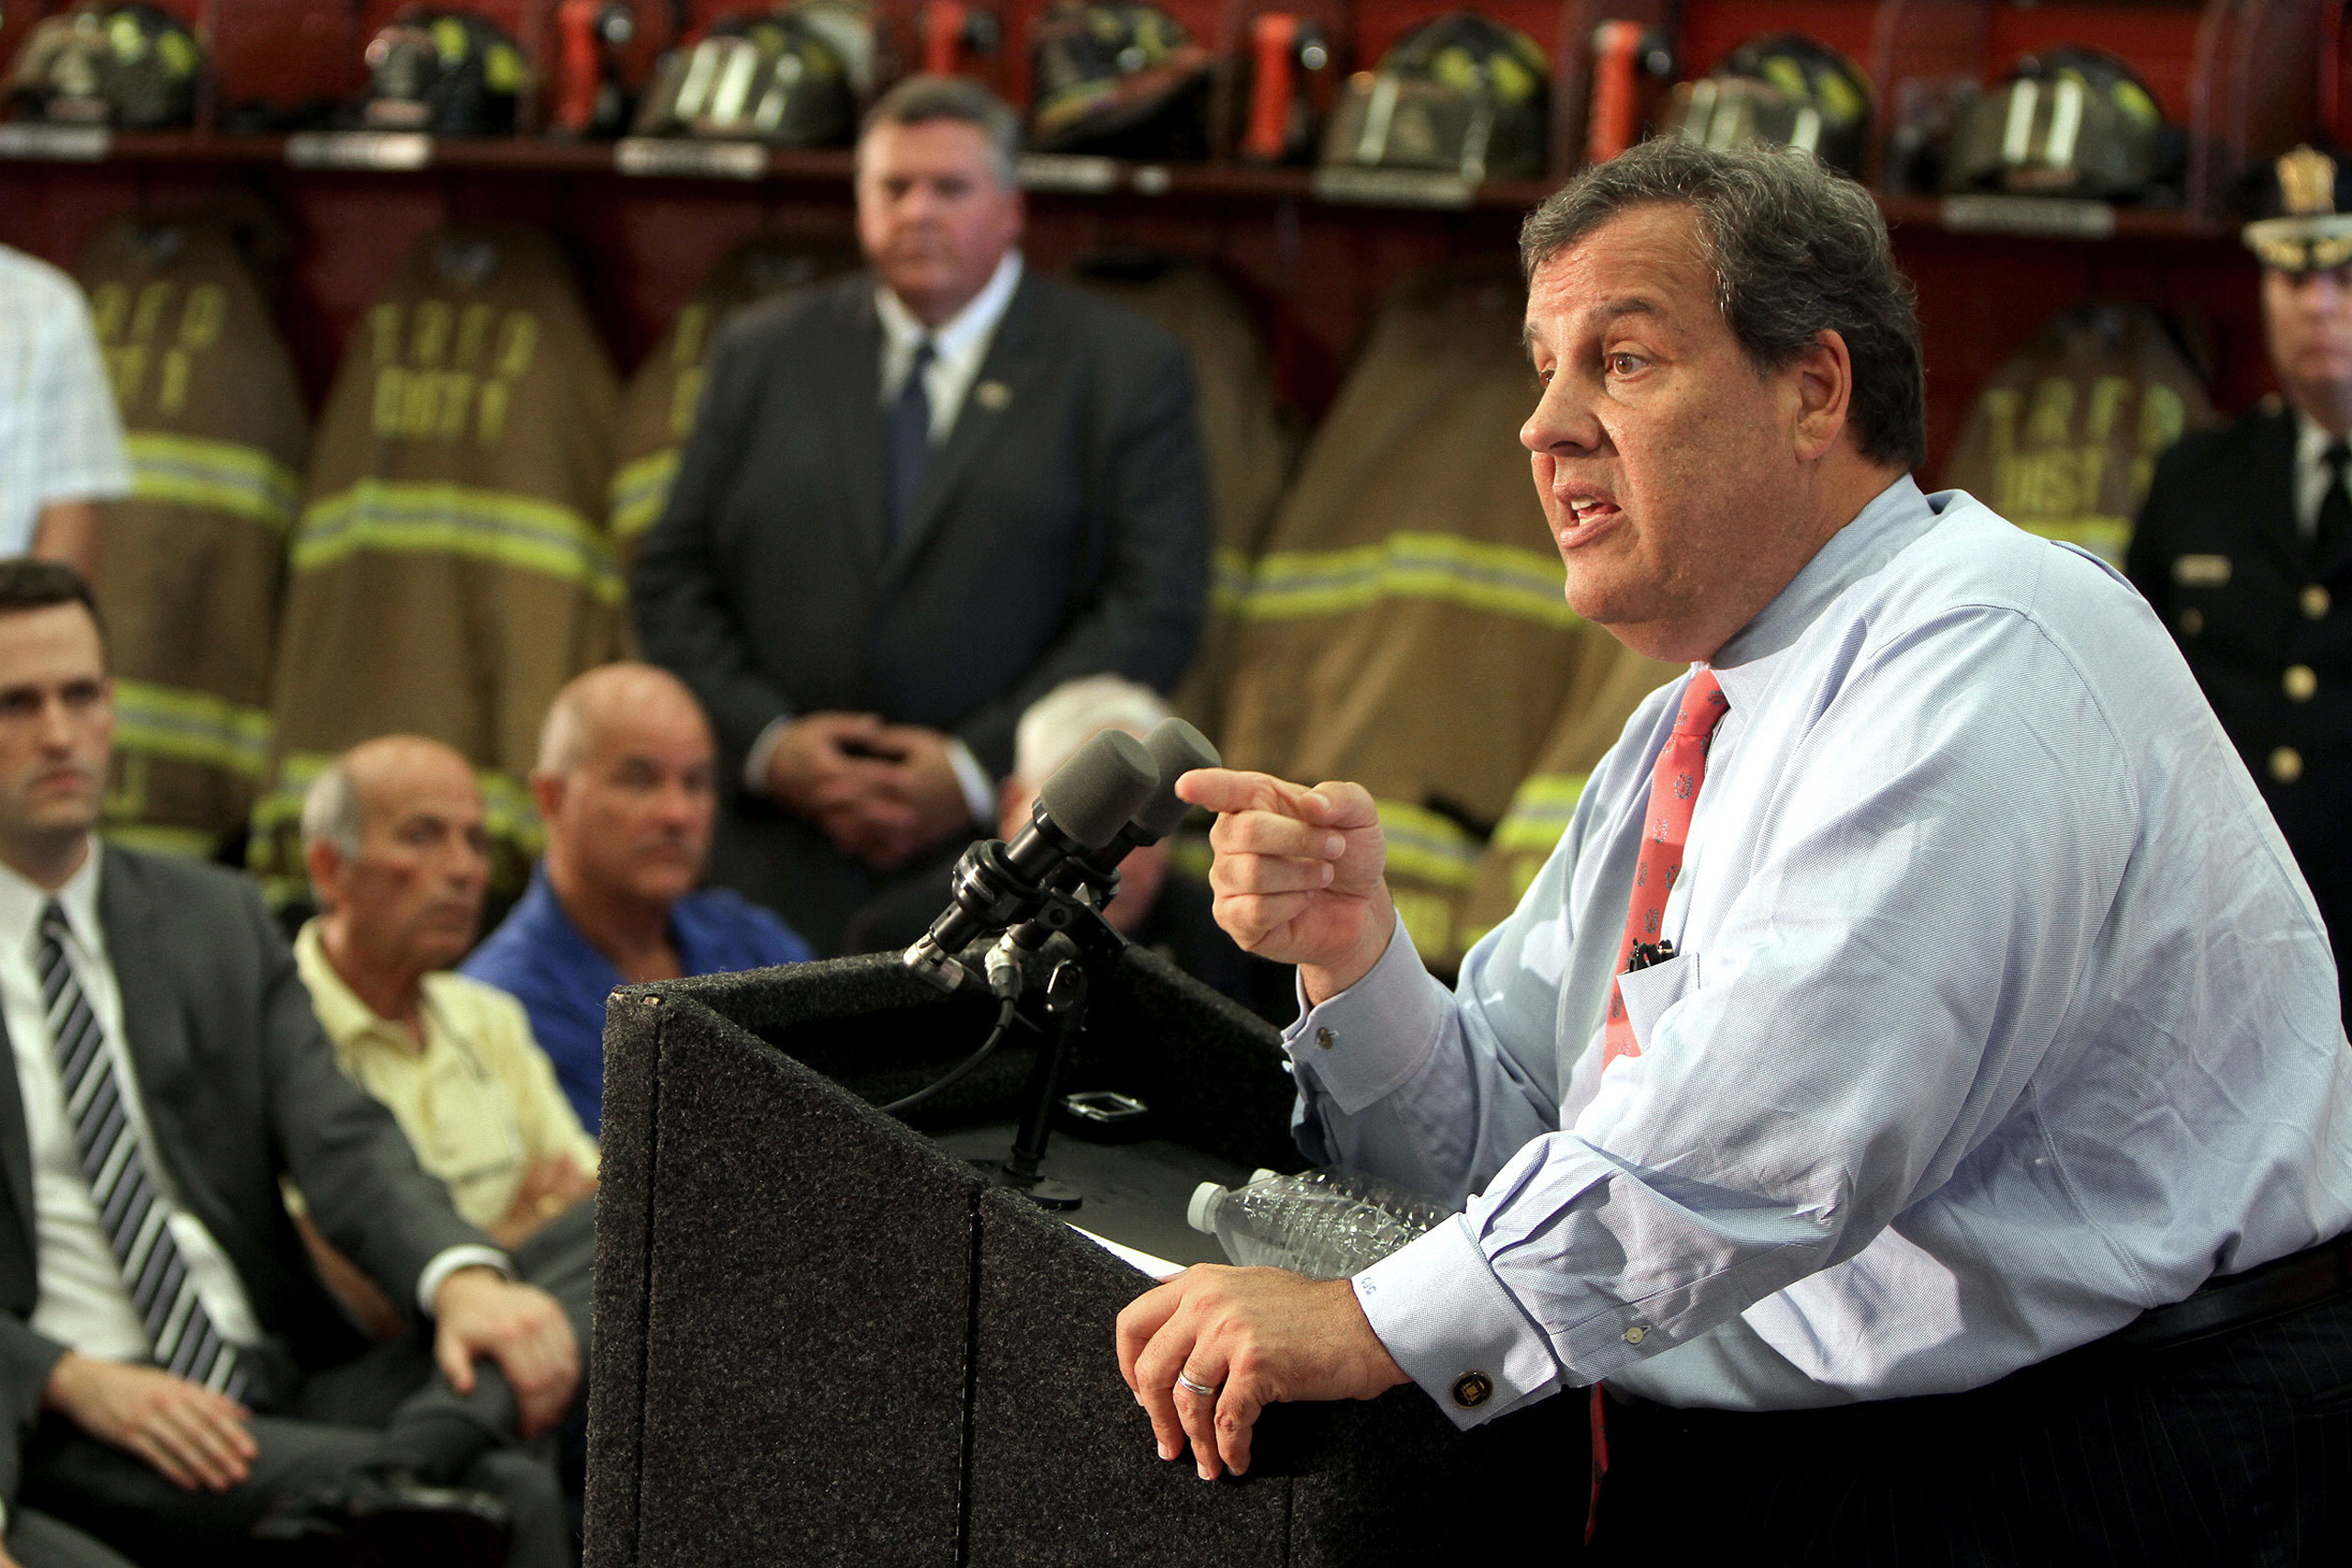 New Jersey Gov. Chris Christie speaks at the East Dover Firehouse in Toms River, N.J, on Aug. 26, 2016. (Thomas P. Costello—The Asbury Park Press/AP)